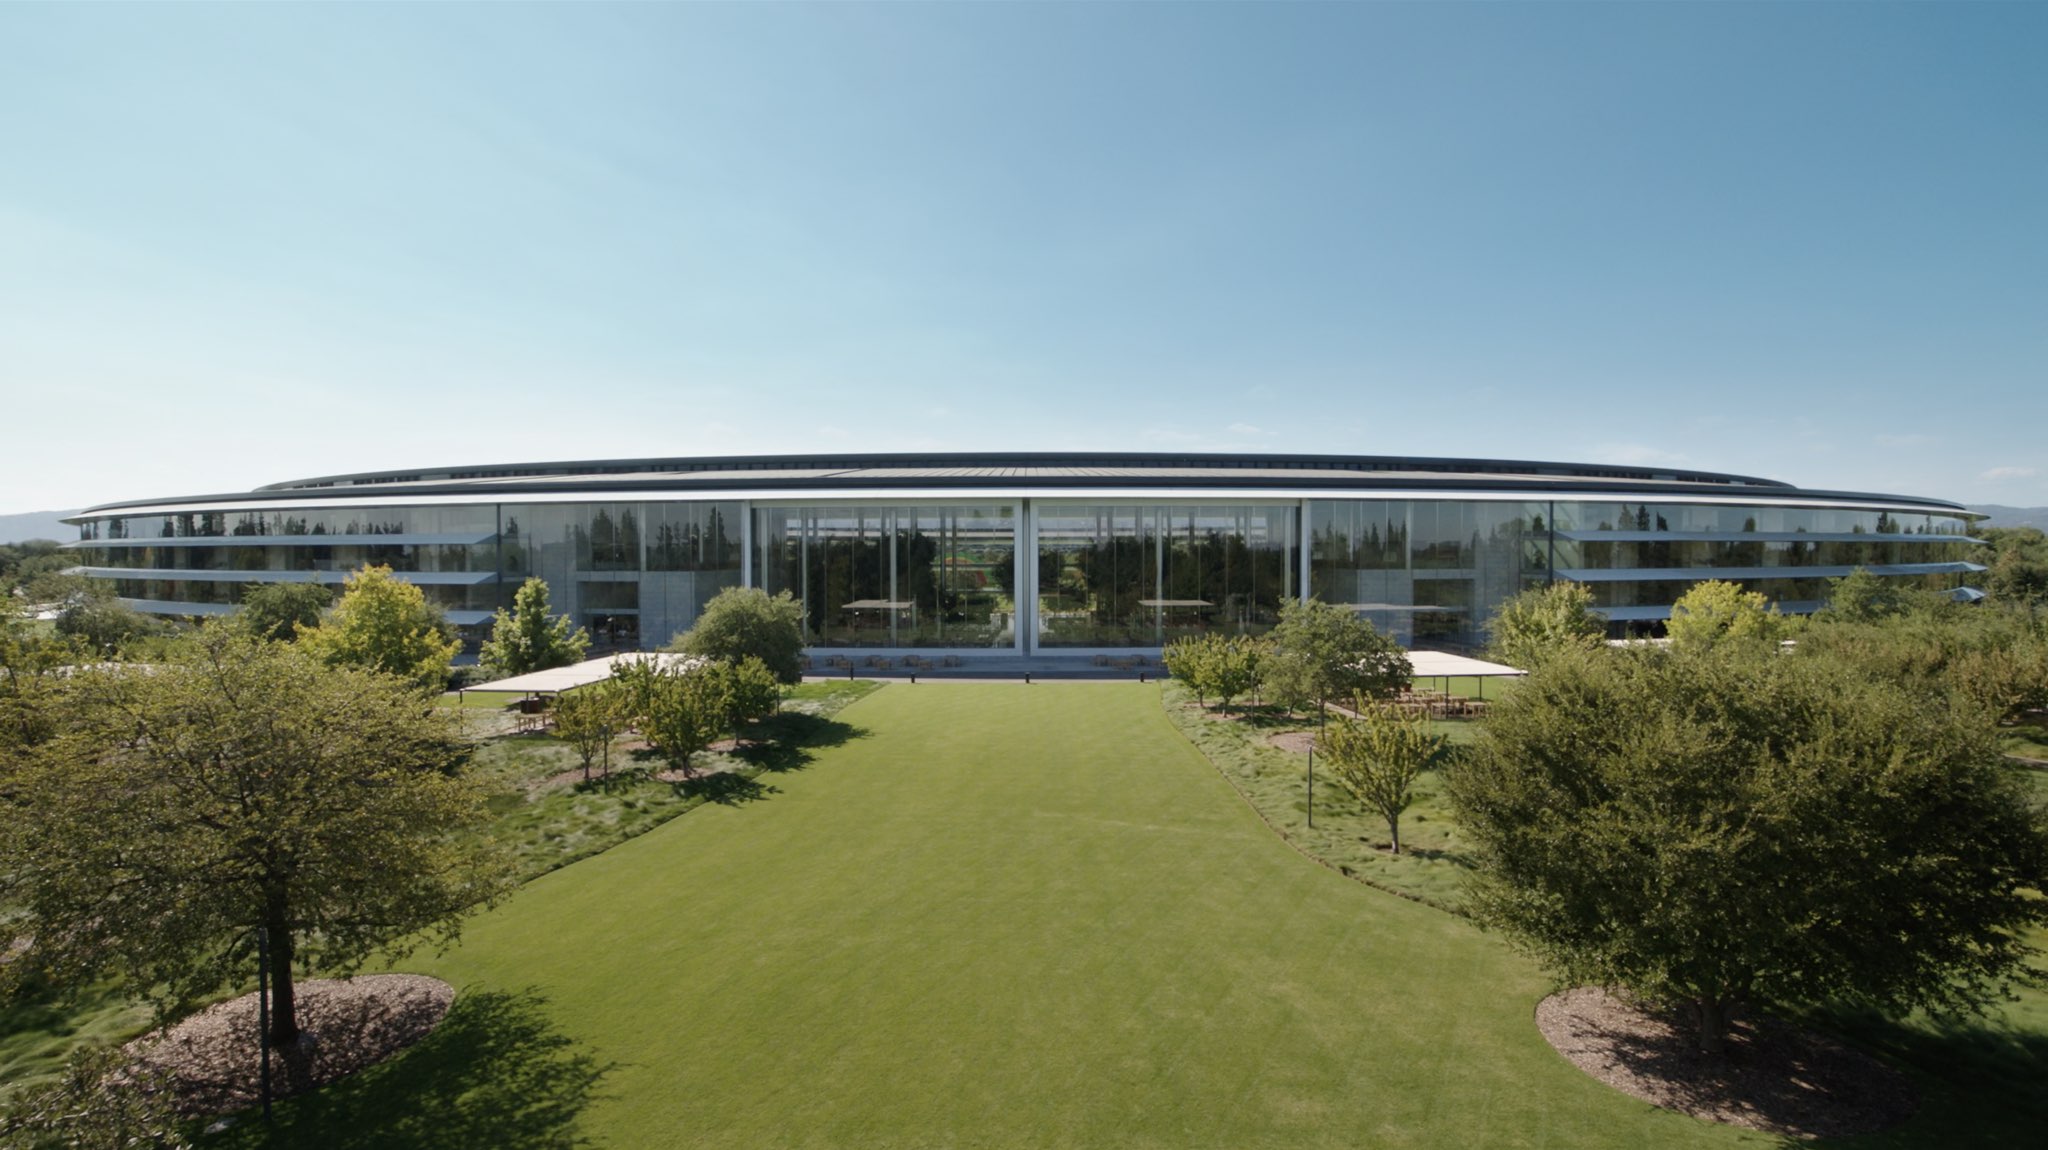 An aerial image showing the main entrance to the Apple Park building 